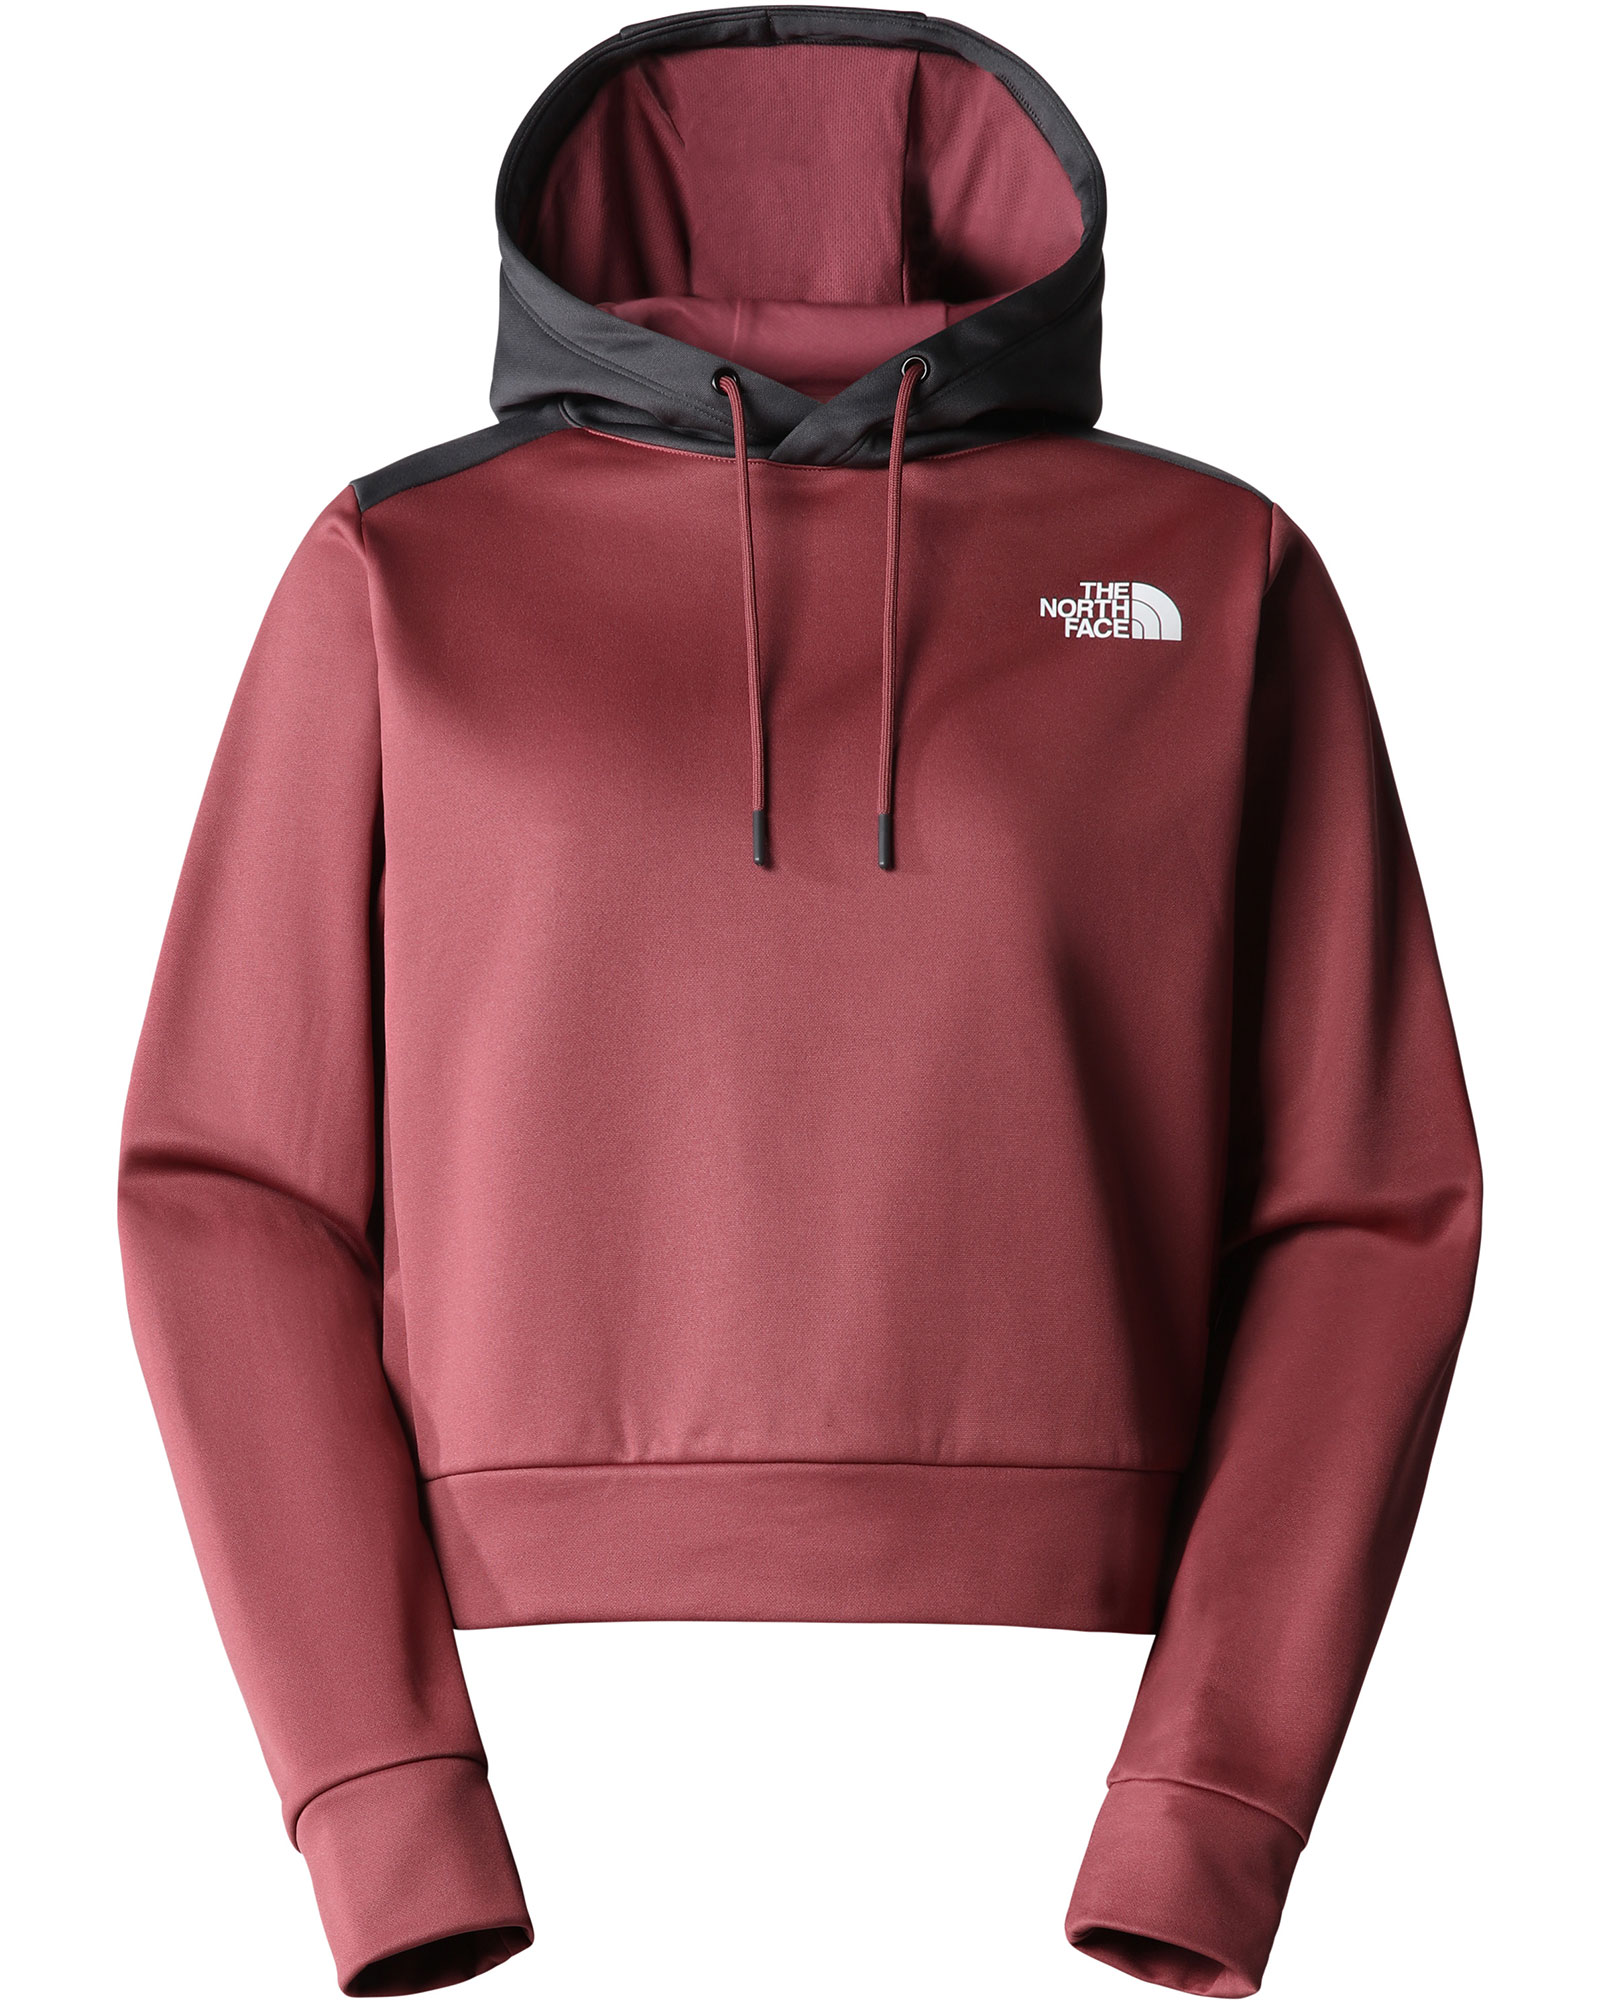 The North Face Reaxion Women’s Fleece Pullover Hoodie - Wild Ginger S